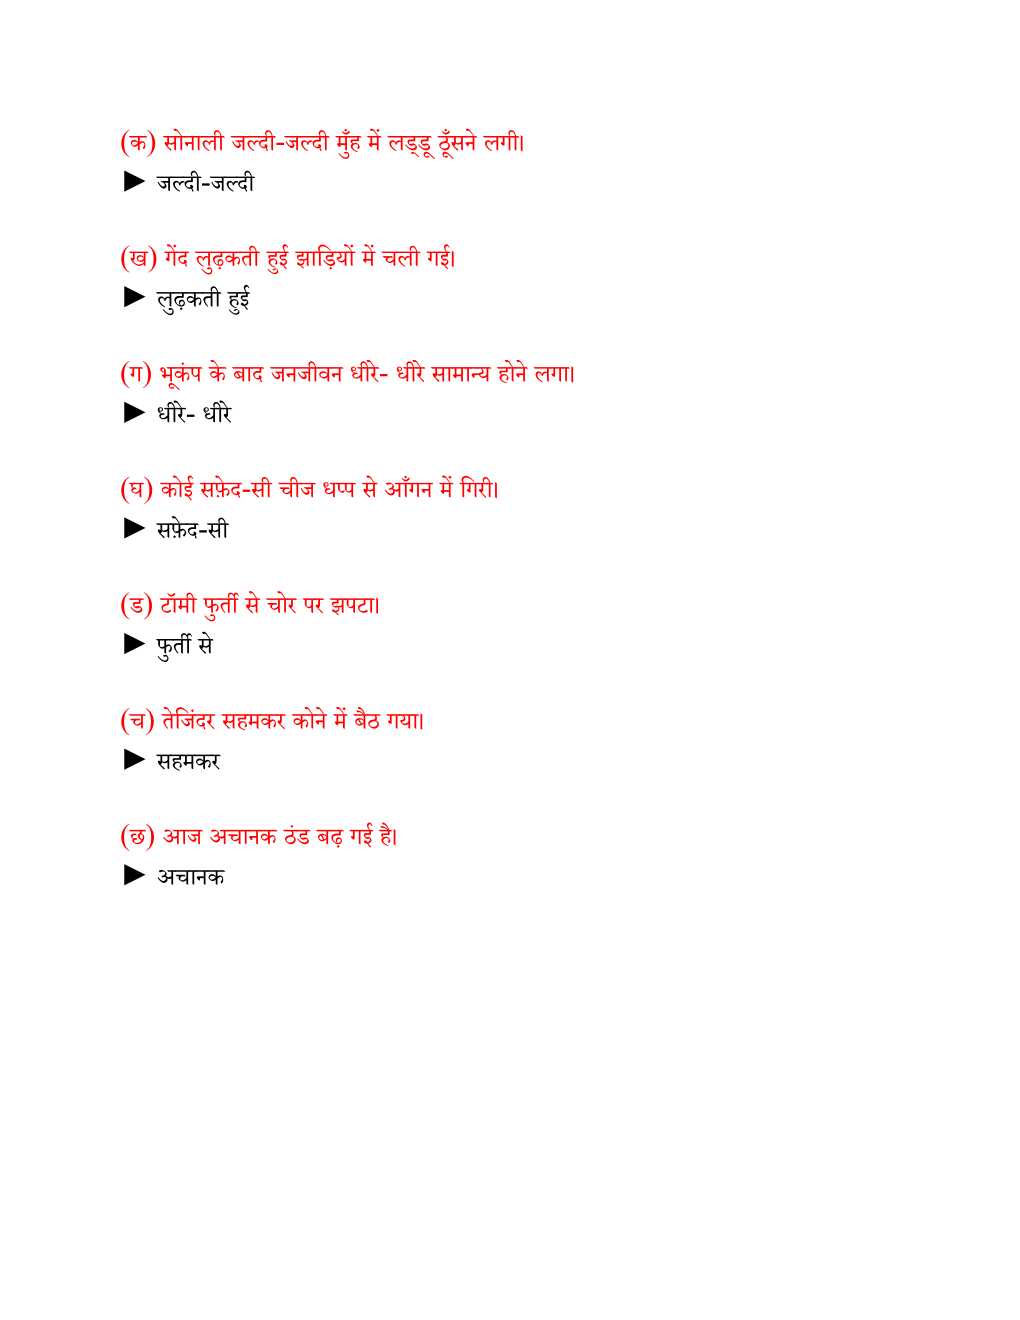 NCERT Solutions For Class 6 Hindi Vasant Chapter 1